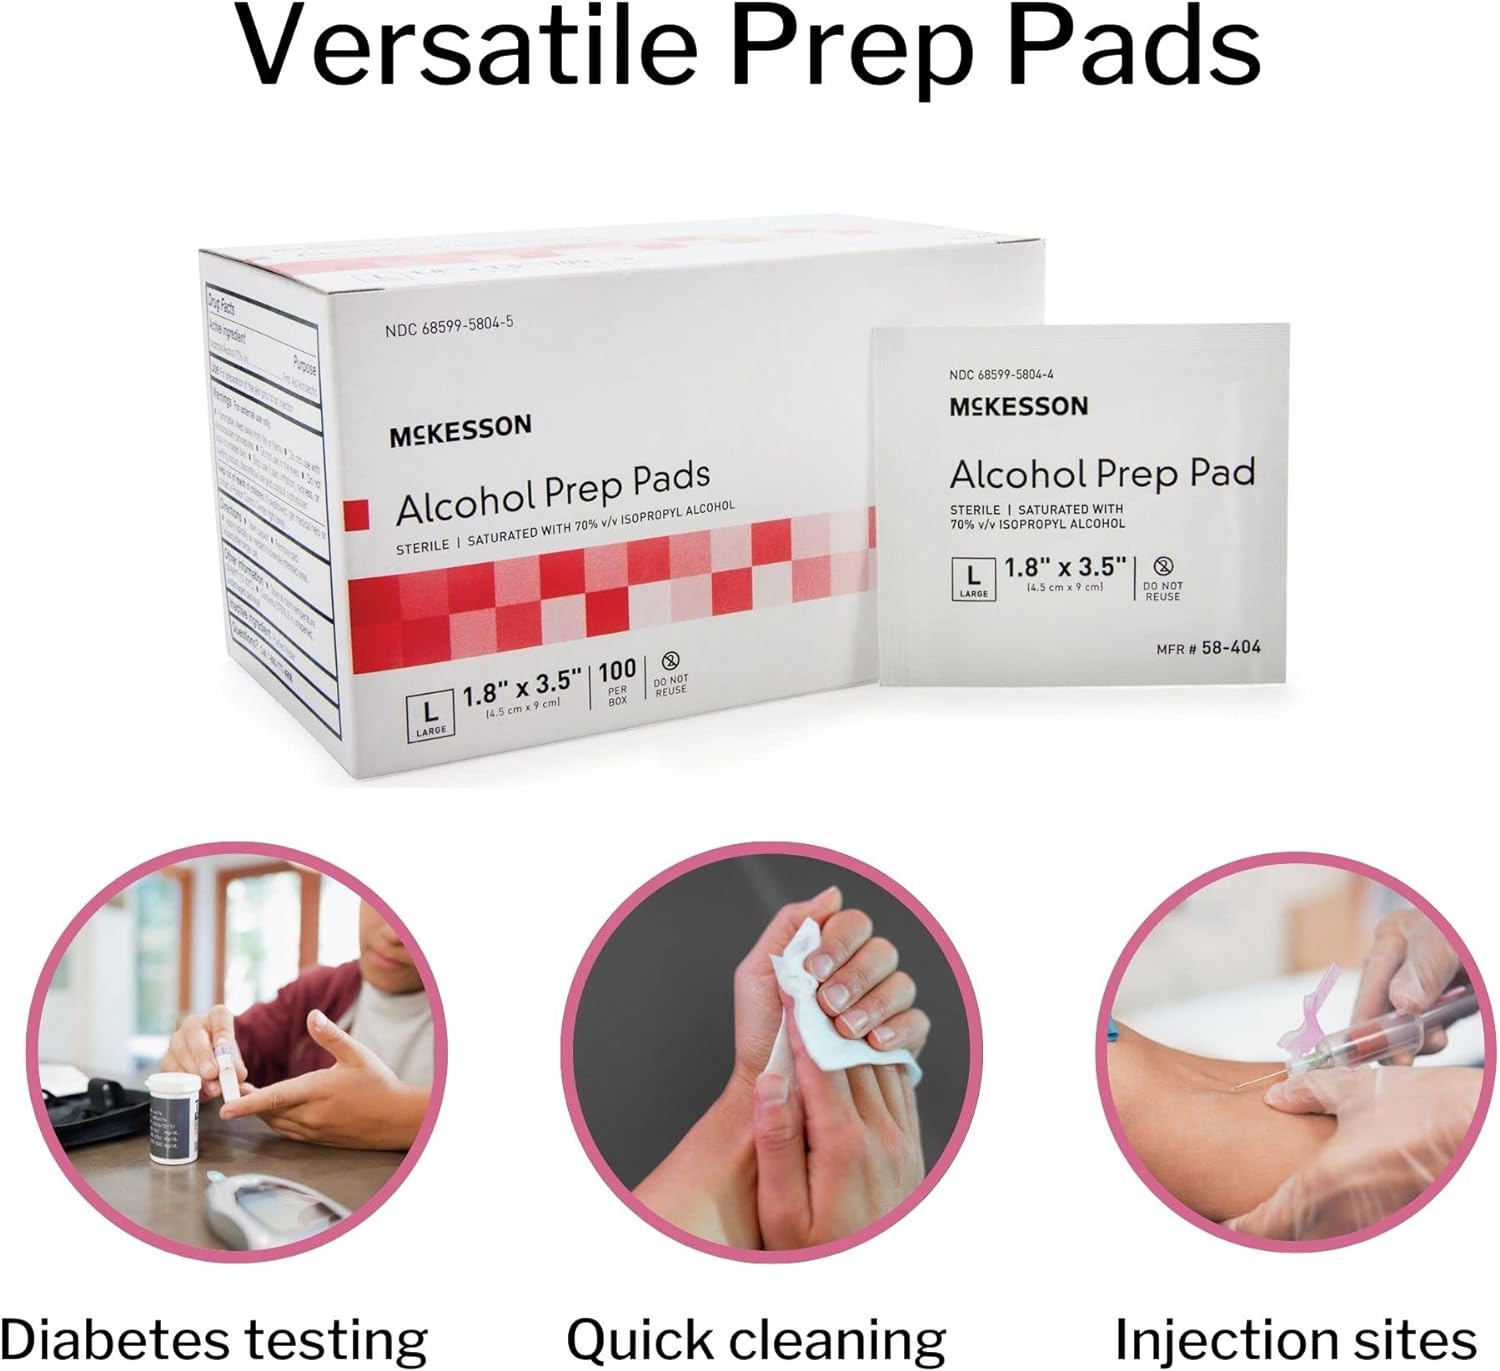 Alcohol Prep Pad, McKesson, Isopropyl Alcohol 70%, Individual Packet, Large, 3.5 X 1.7 Inch, Sterile, 100 Ct. Box, Case of 10 Boxes = 1000 Pads